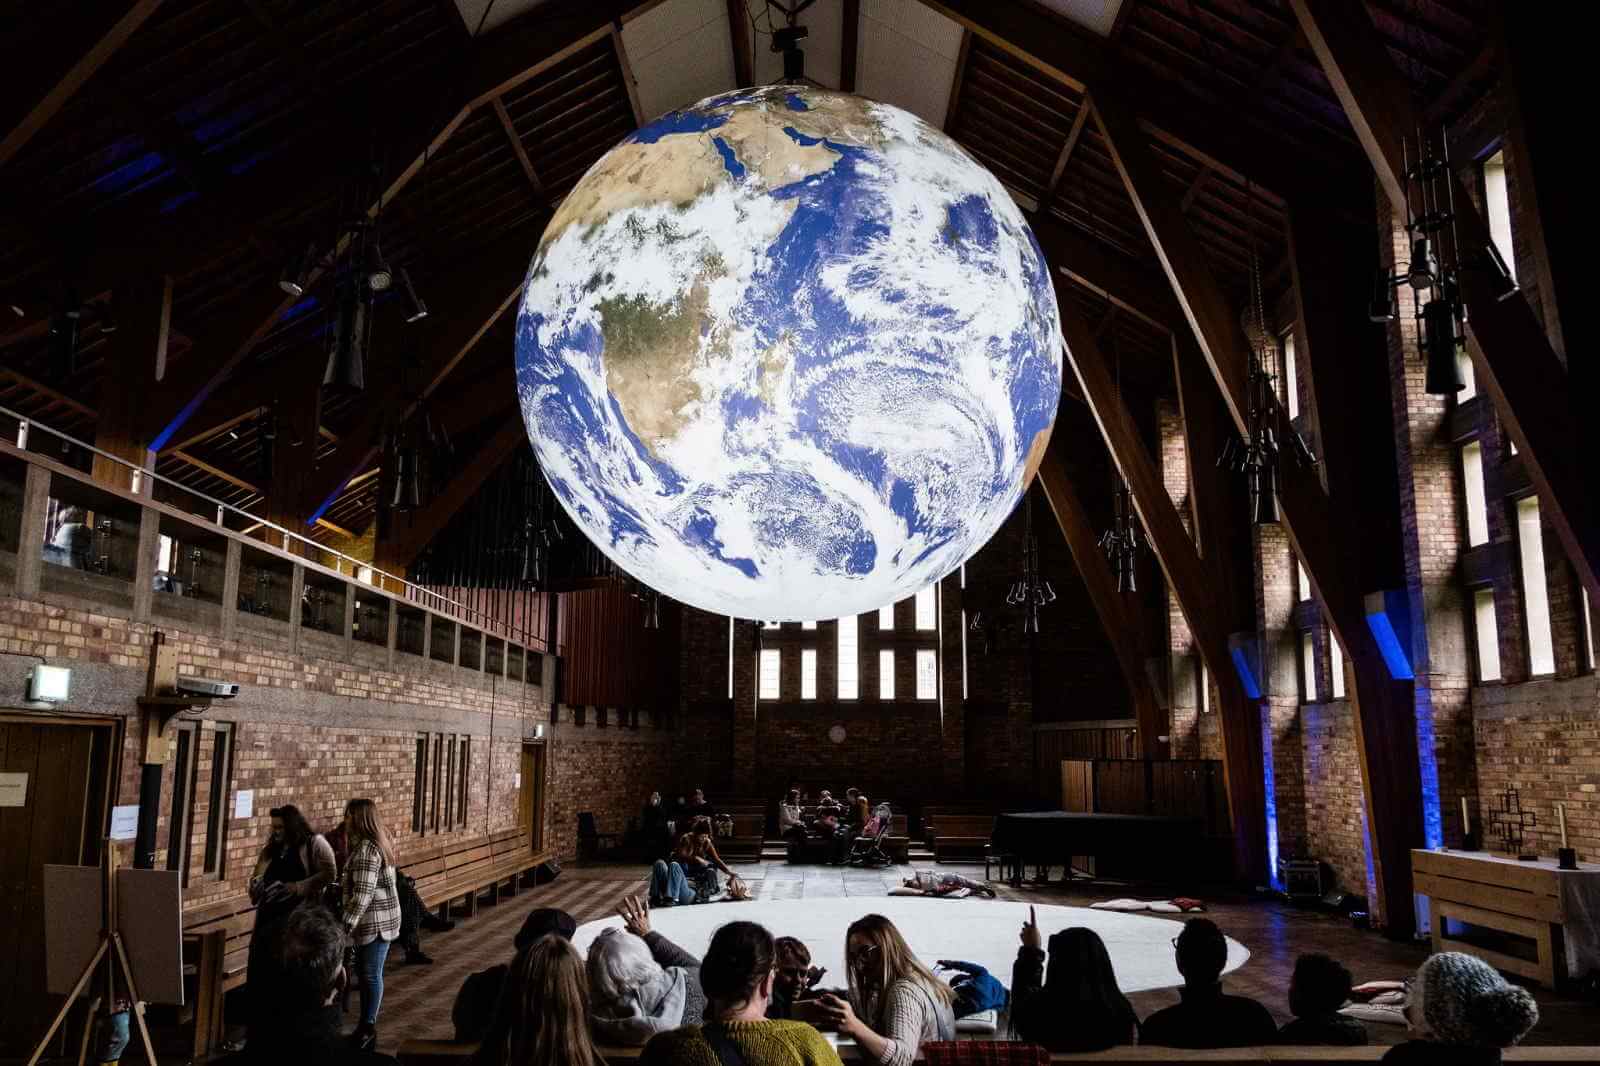 image credit Jenny Harper. Main image large earth over crowd of people inside Chapel space. Second image row of people watching an aerial artist swing on an arch made of bamboo outdoors with trees in the background. 